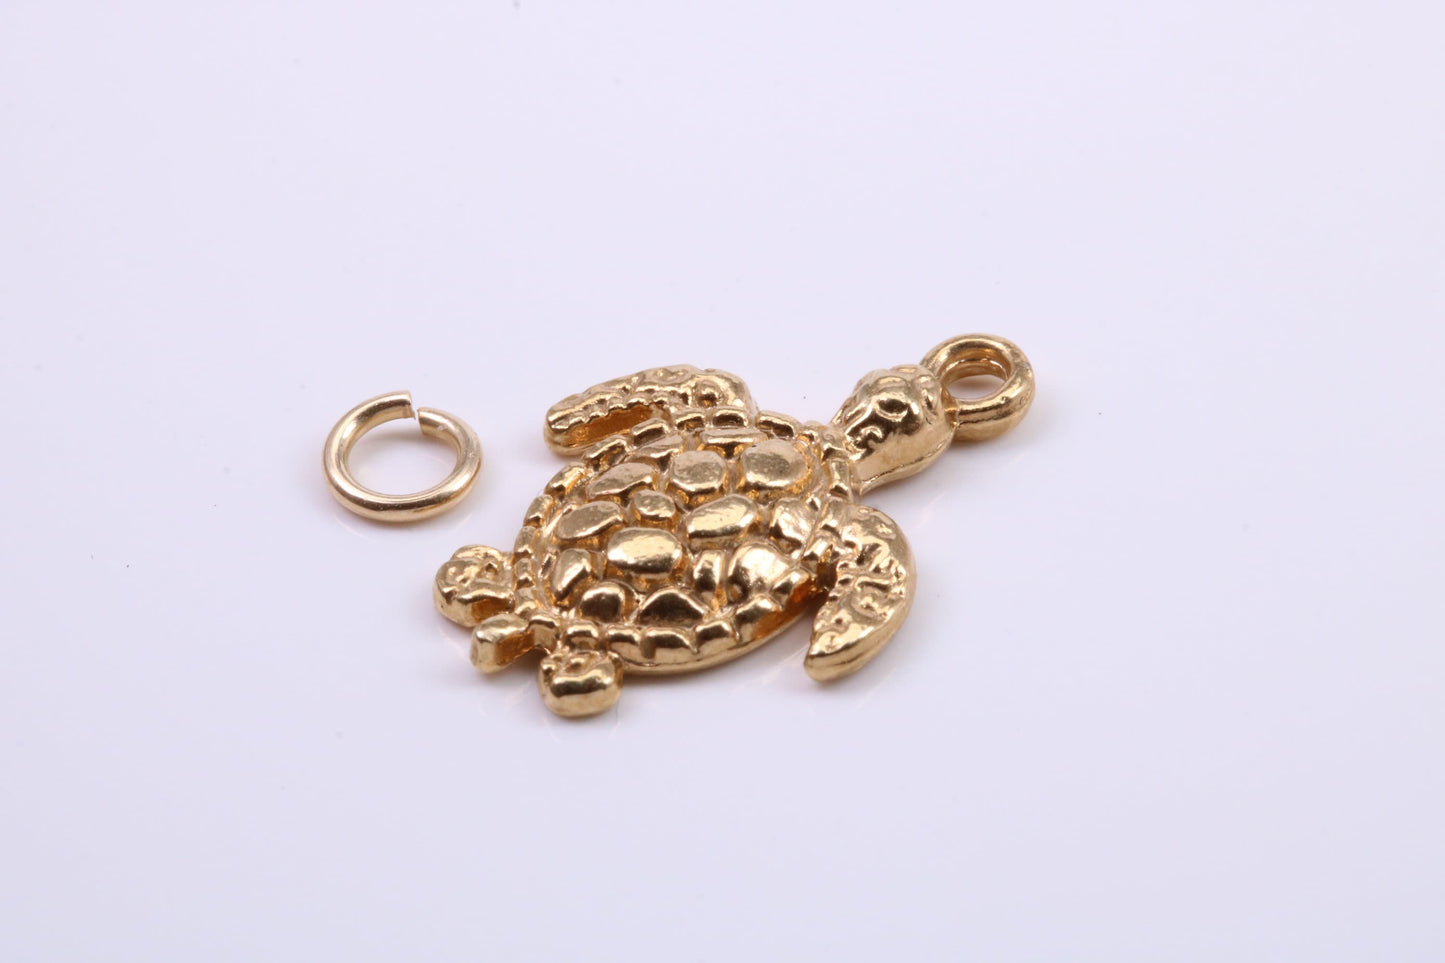 Turtle Charm, Traditional Charm, Made from Solid 9ct Yellow Gold, British Hallmarked, Complete with Attachment Link